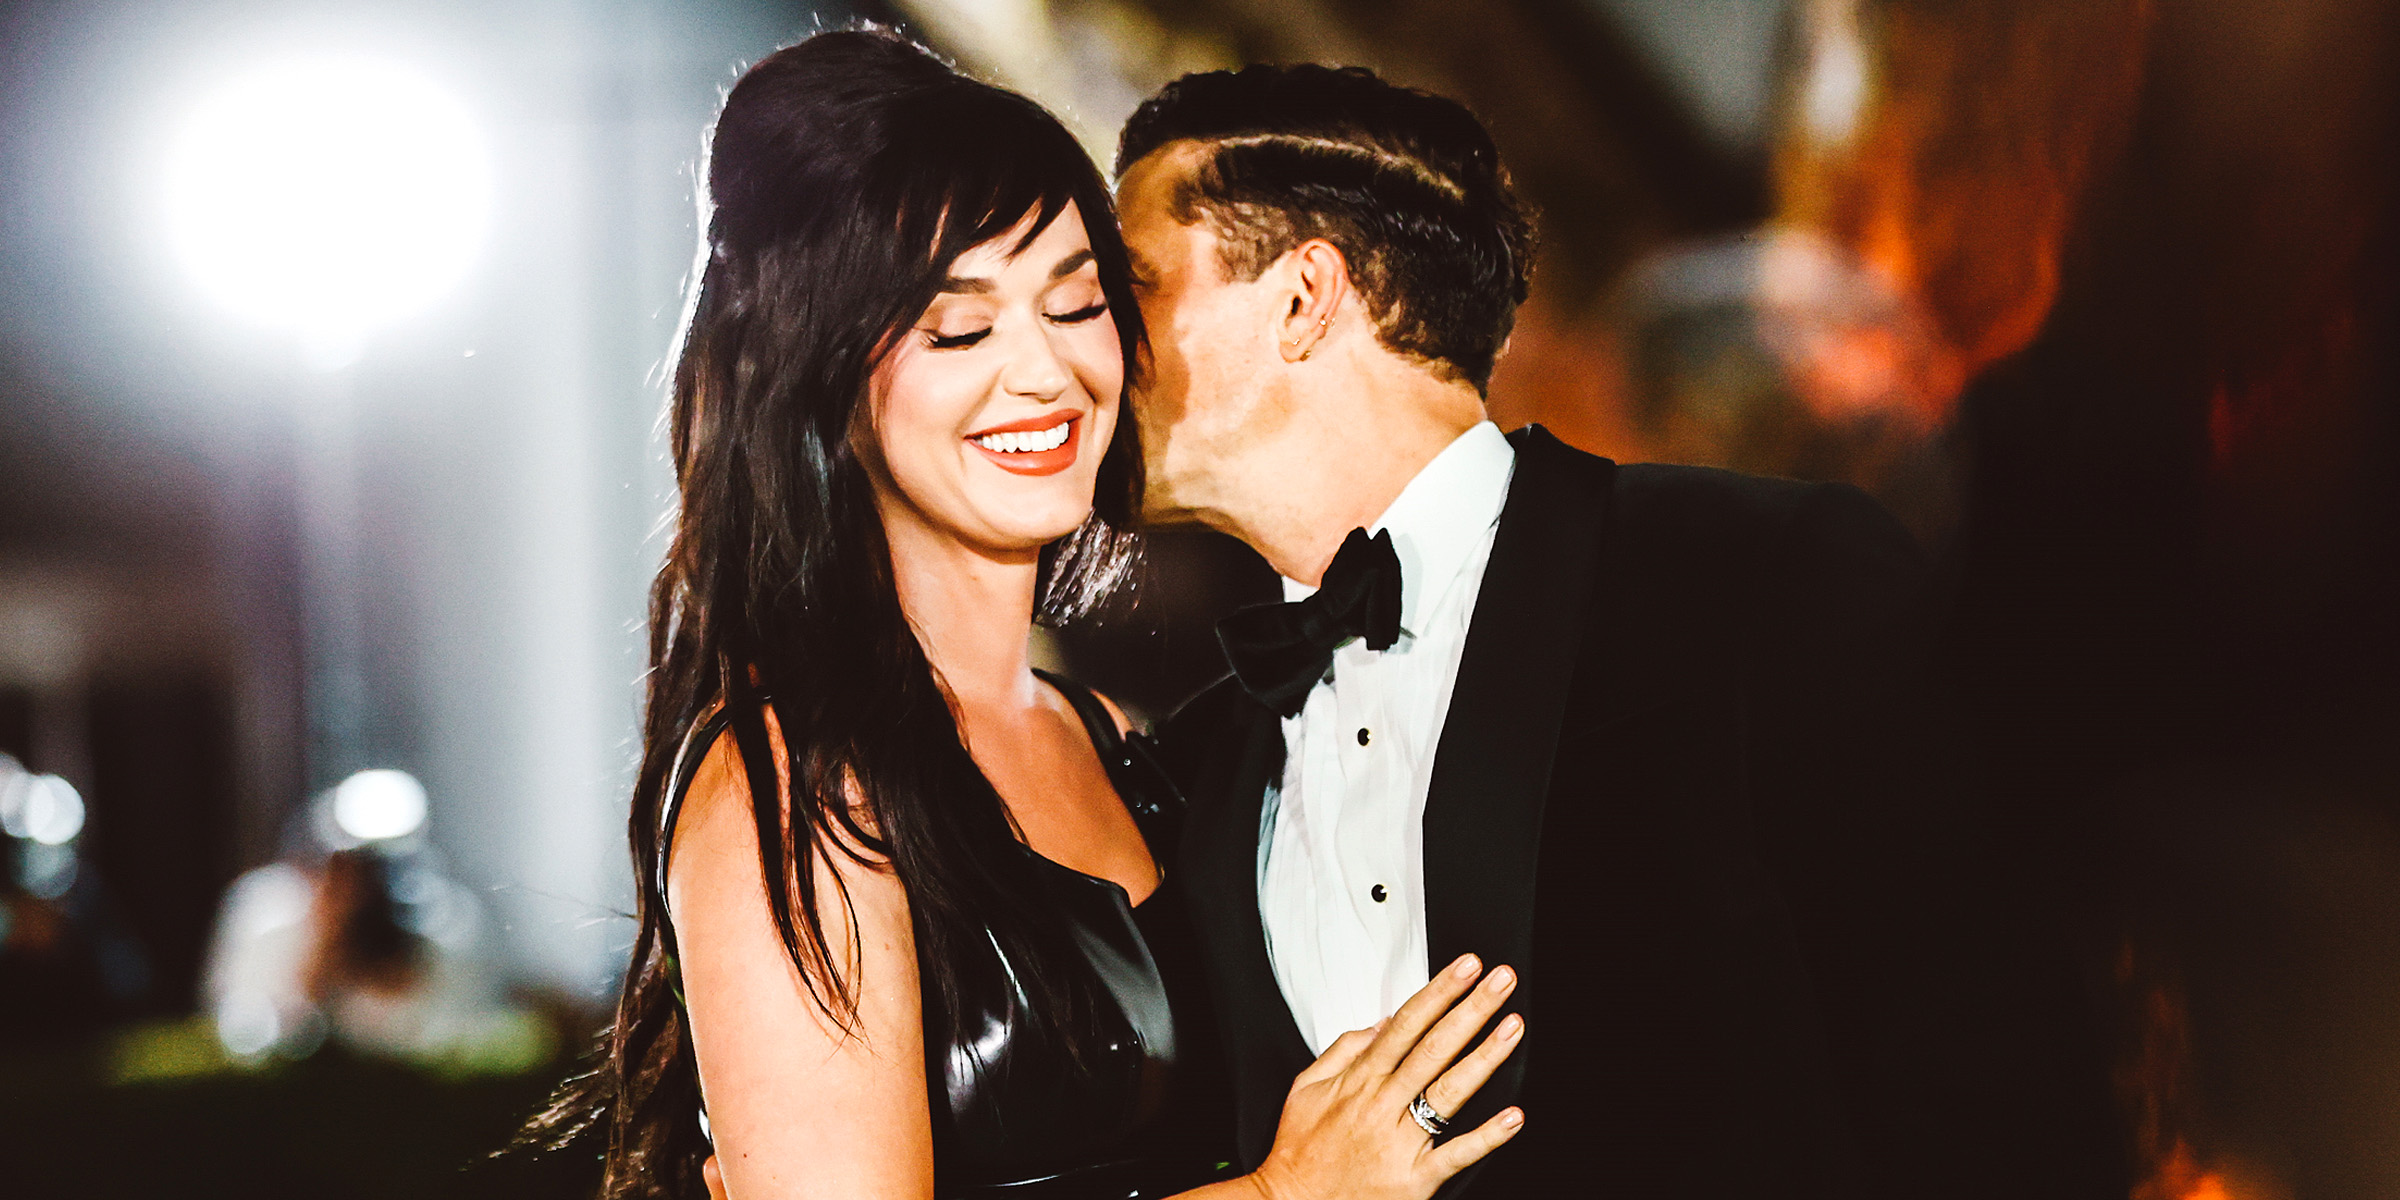 Katy Perry and Orlando Bloom | Source: Getty Images